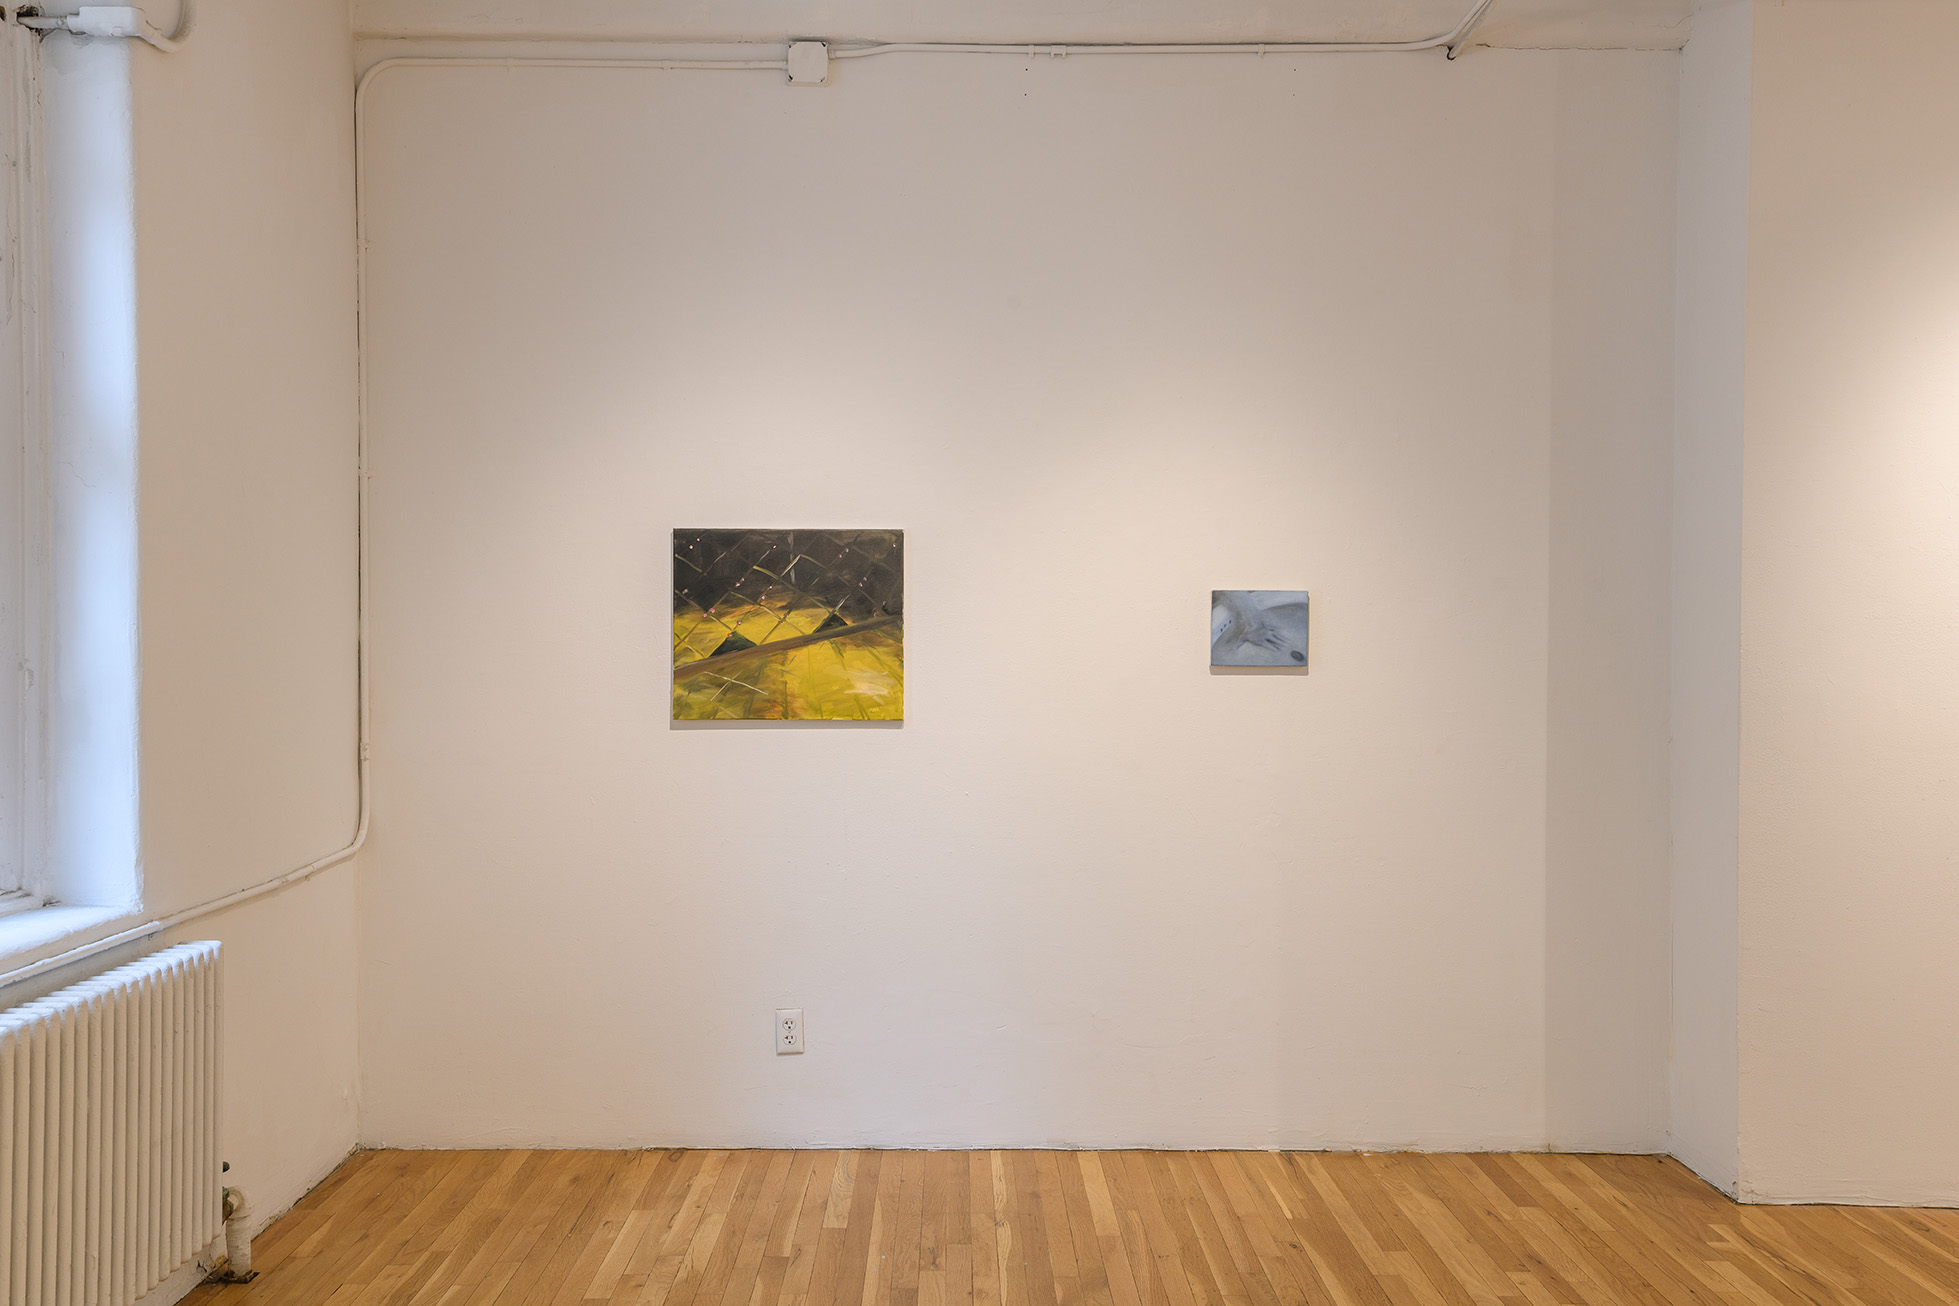 [Two paintings hanging on a white wall hear a window. The painting on the left, rendered in yellows, acid greens, and blacks, is slightly larger than the painting on the right, which is rendered in blues and grays.]